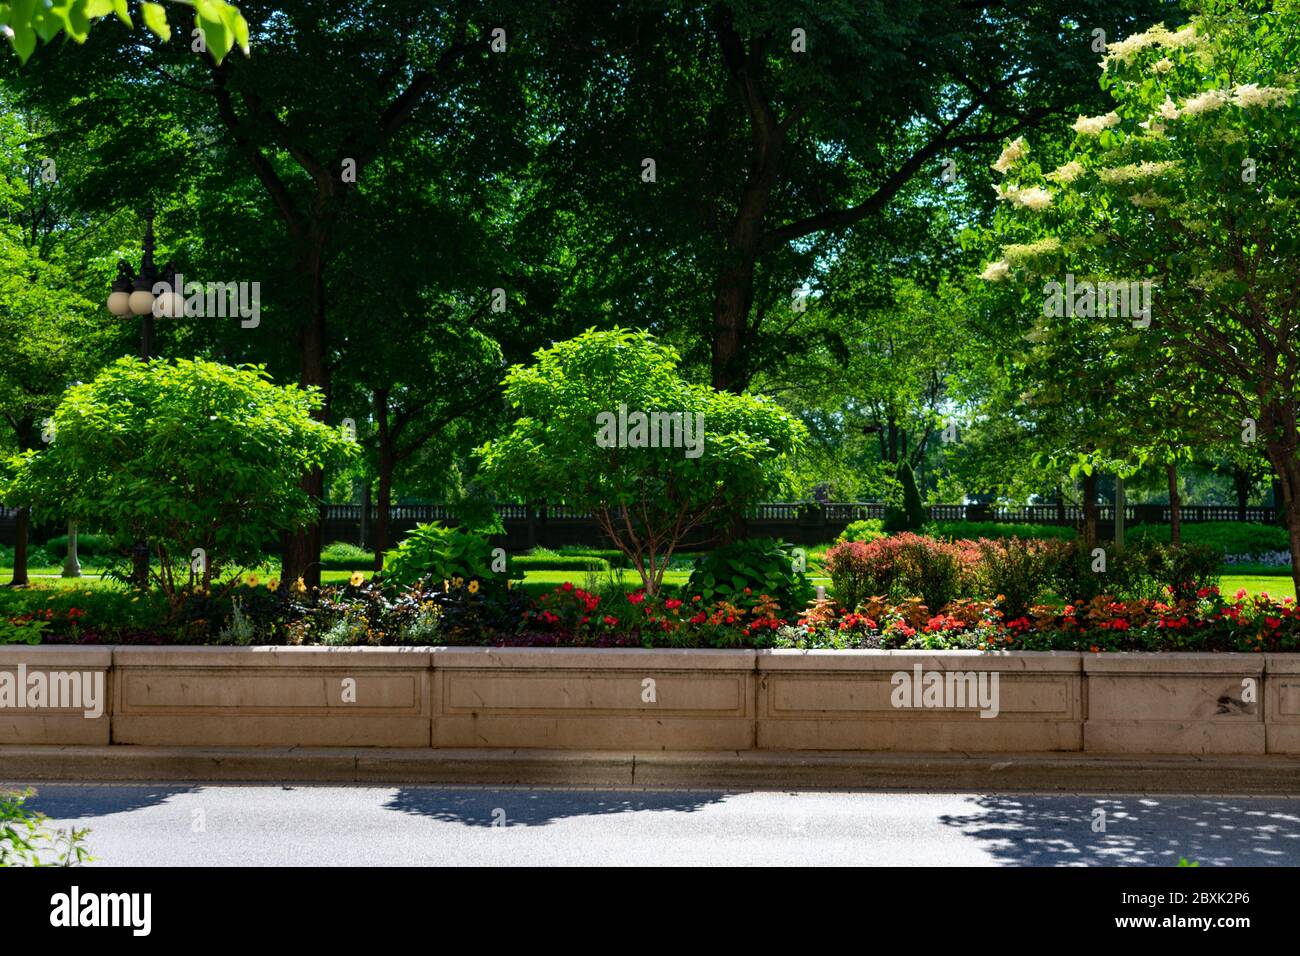 Flowers and Plants in the middle of Michigan Avenue with No Cars and Grant Park in the background in Chicago Stock Photo